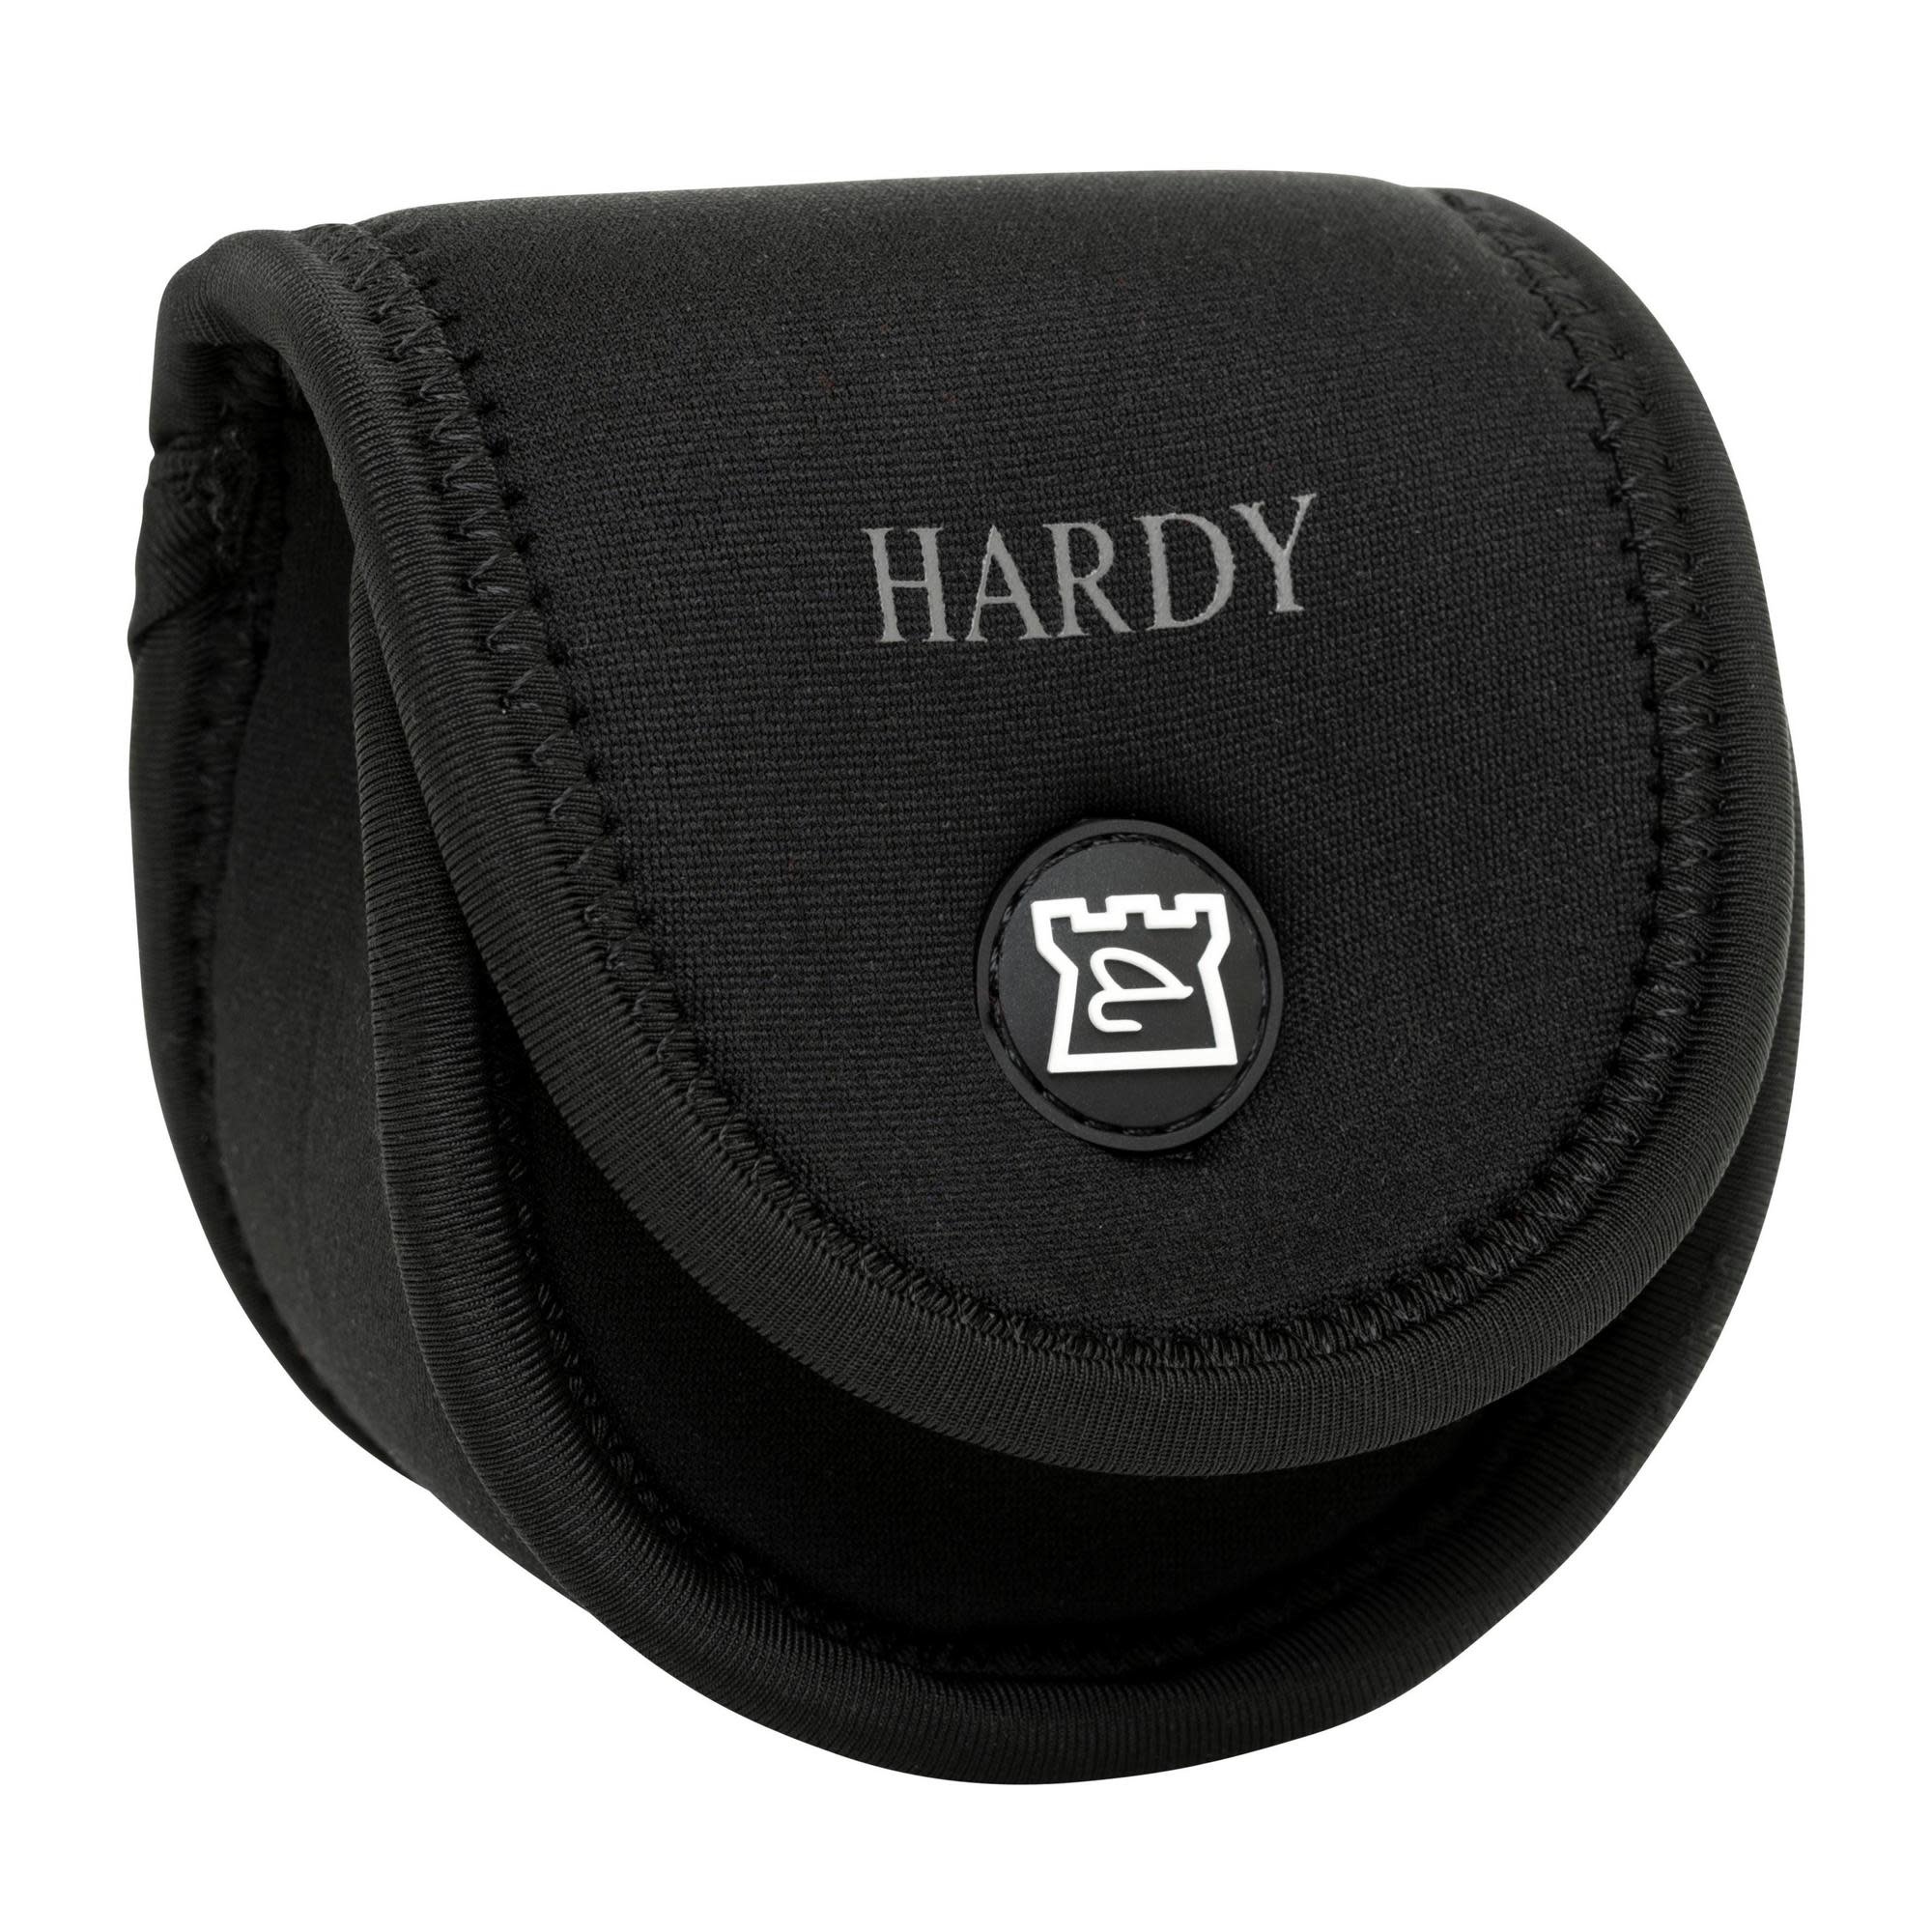 Hardy Accessories Gear - Compact Bag Freshwater Fly Fishing